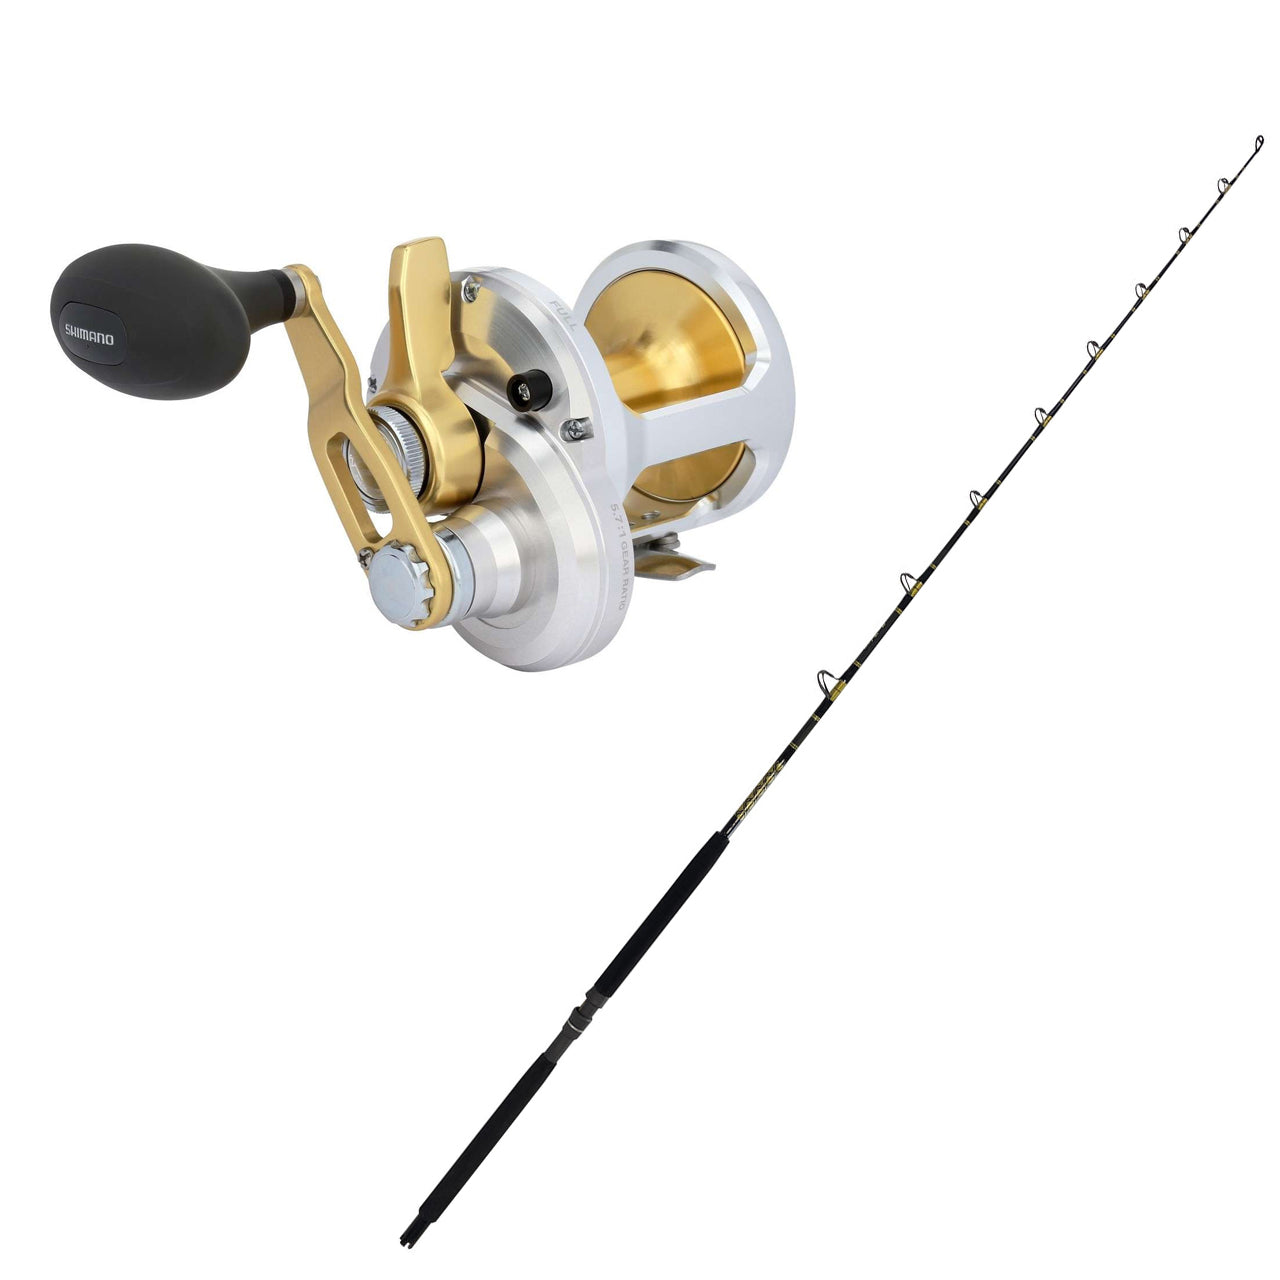 Shimano TALICA 16 LEVER DRAG with KC 15-30 7'0 Composite CHAOS Gold Combo  from SHIMANO/CHAOS - CHAOS Fishing